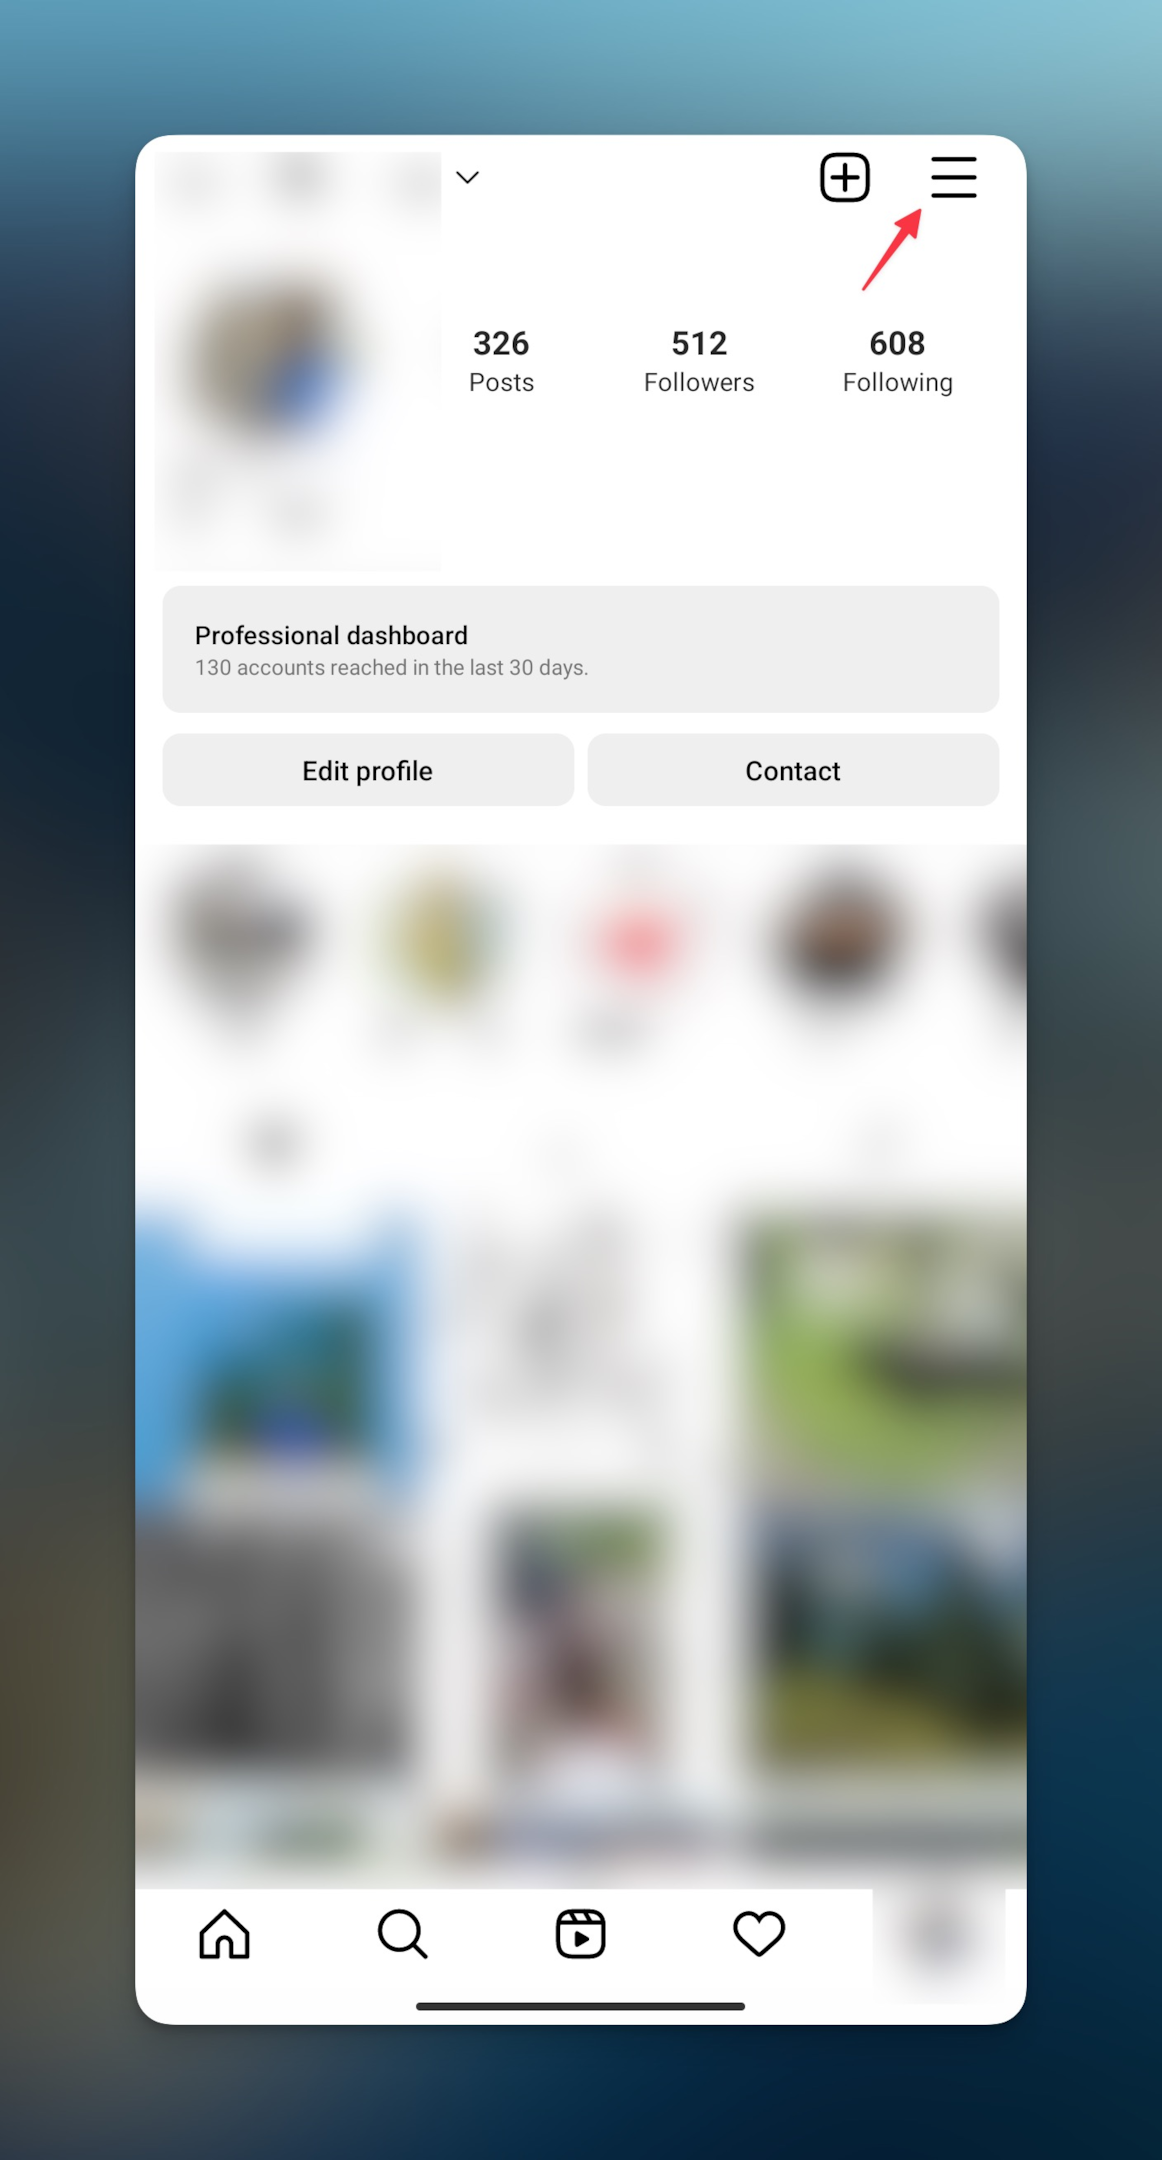 Remote.tools shows to tap on hamburger menu to block spam comments on any Instagram account